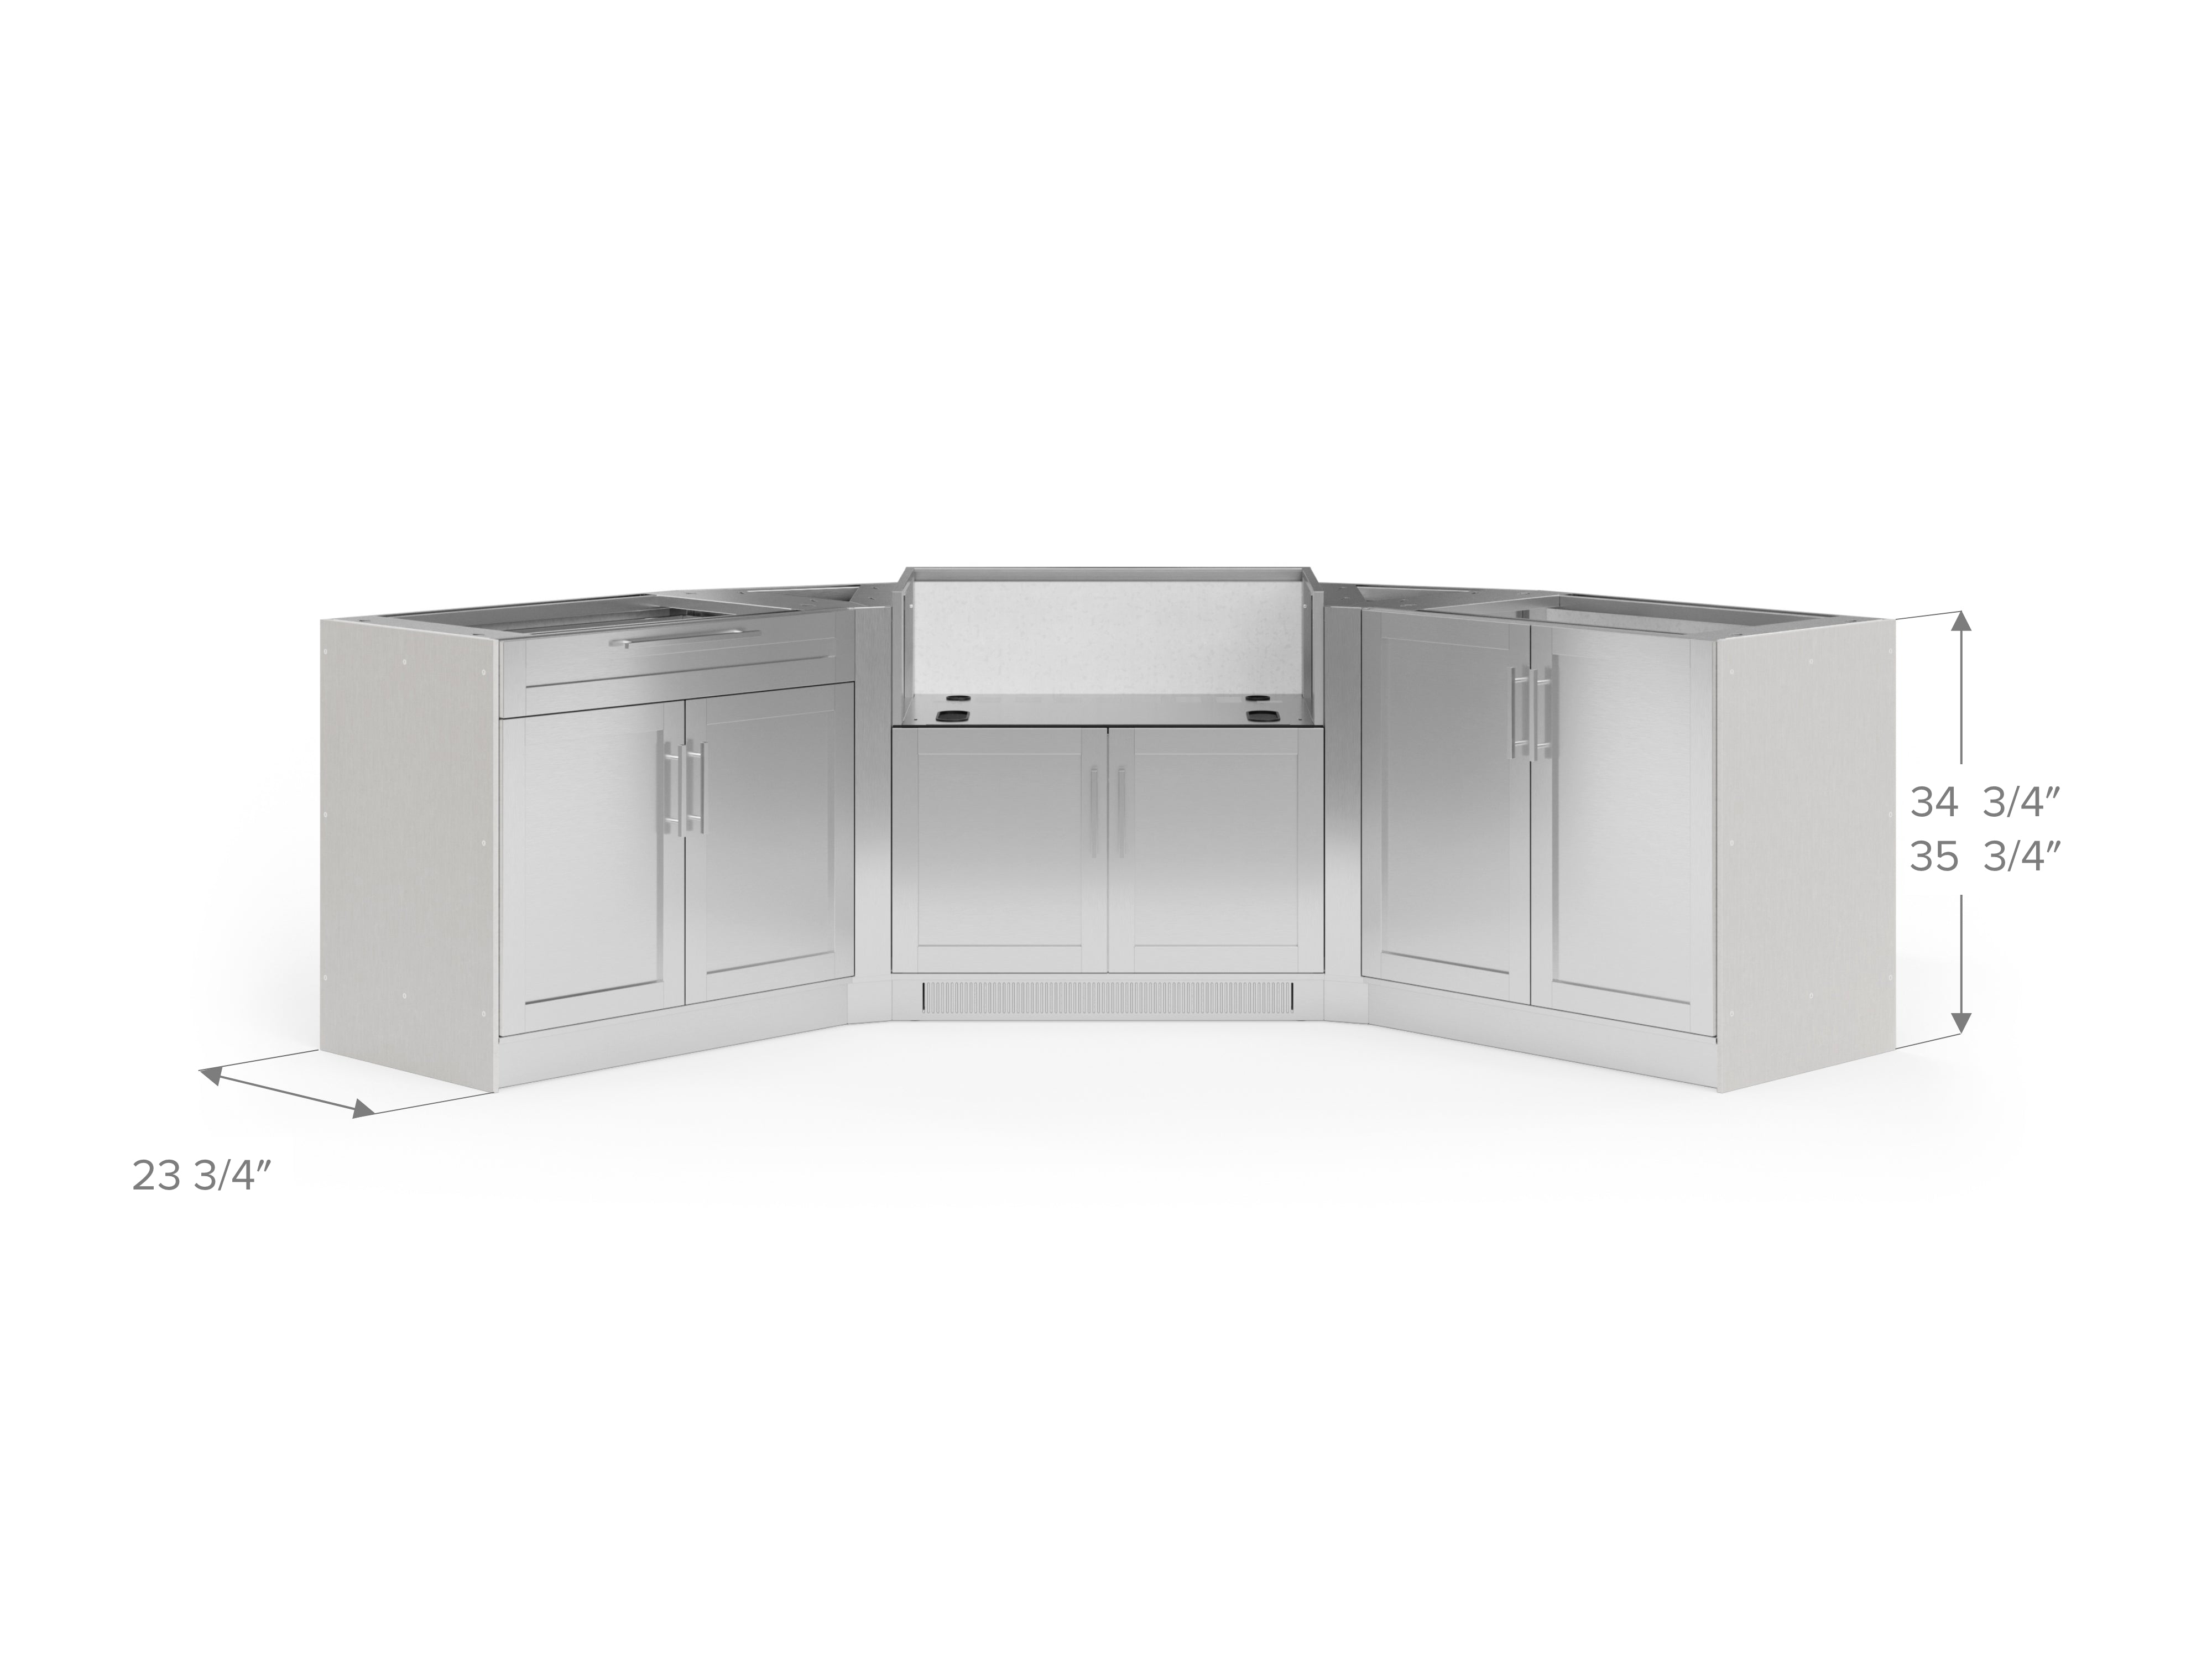 Outdoor Kitchen Signature Series 6 Piece U Shape Cabinet Set with 2 Door, Bar and Grill Cabinet